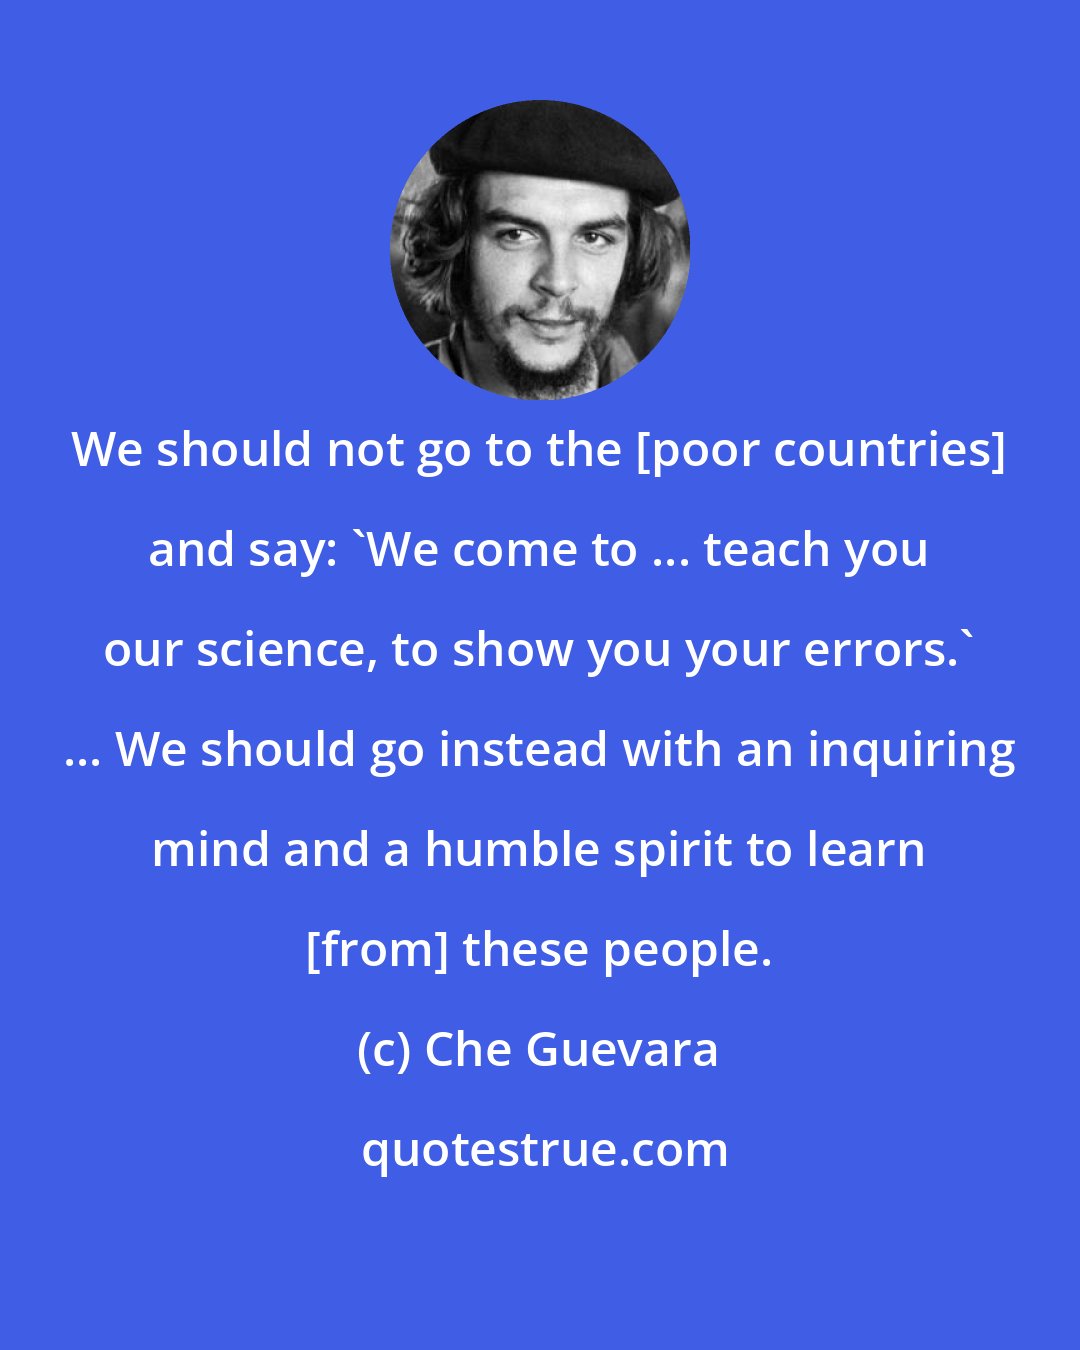 Che Guevara: We should not go to the [poor countries] and say: 'We come to ... teach you our science, to show you your errors.' ... We should go instead with an inquiring mind and a humble spirit to learn [from] these people.